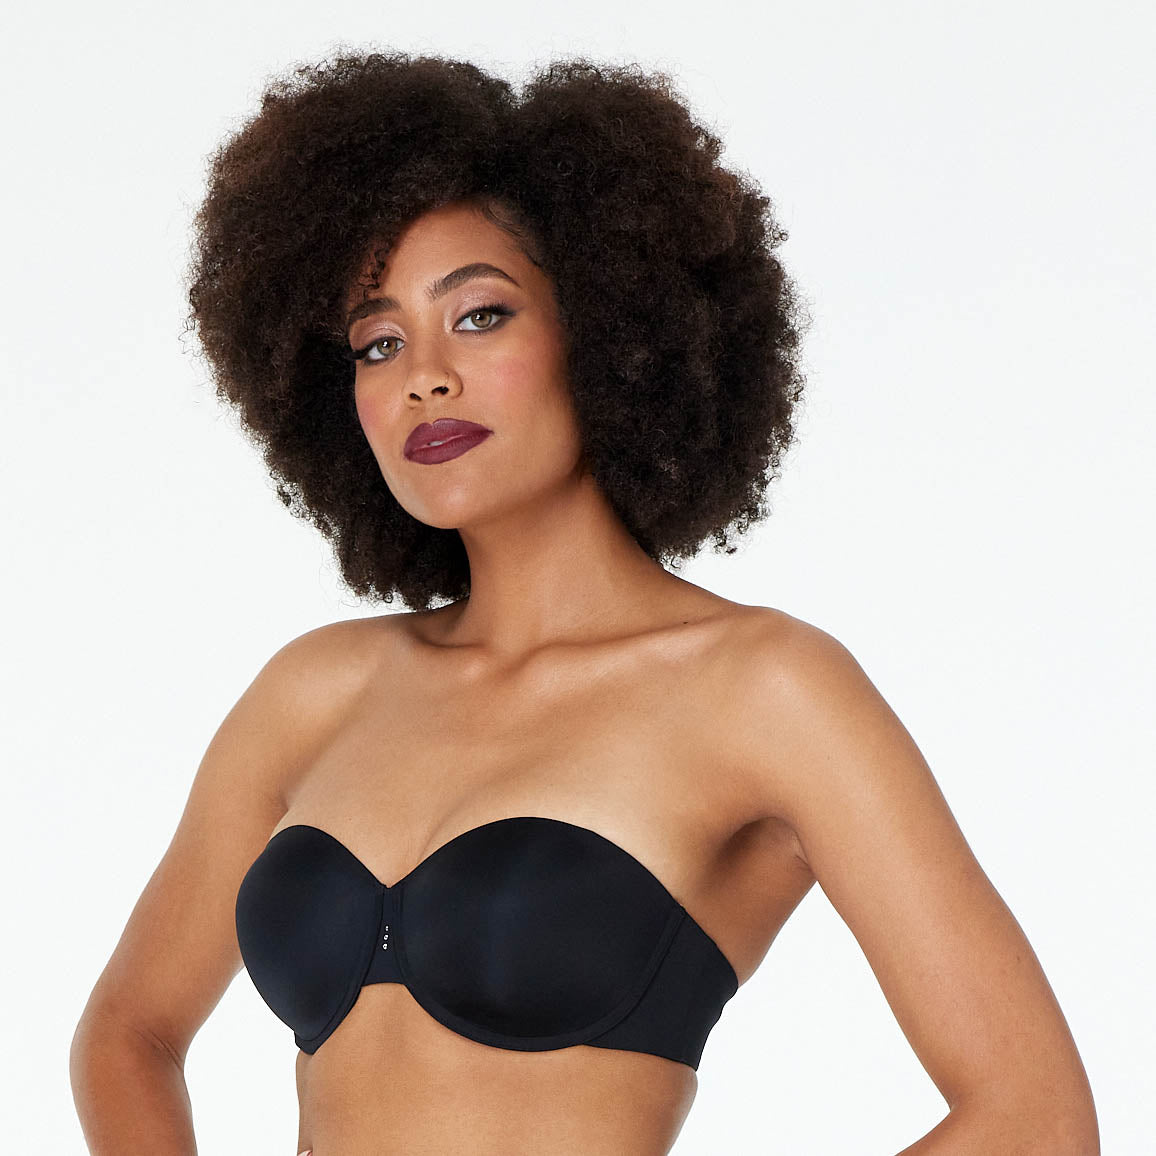 Harbour Bay Plaza - SOMA - In Store at Chico's Bodify Bras are super  comfortable, conform to your shape, & have non-slip straps. Get the Right  Bra & the Right Fit! 772.283.3447